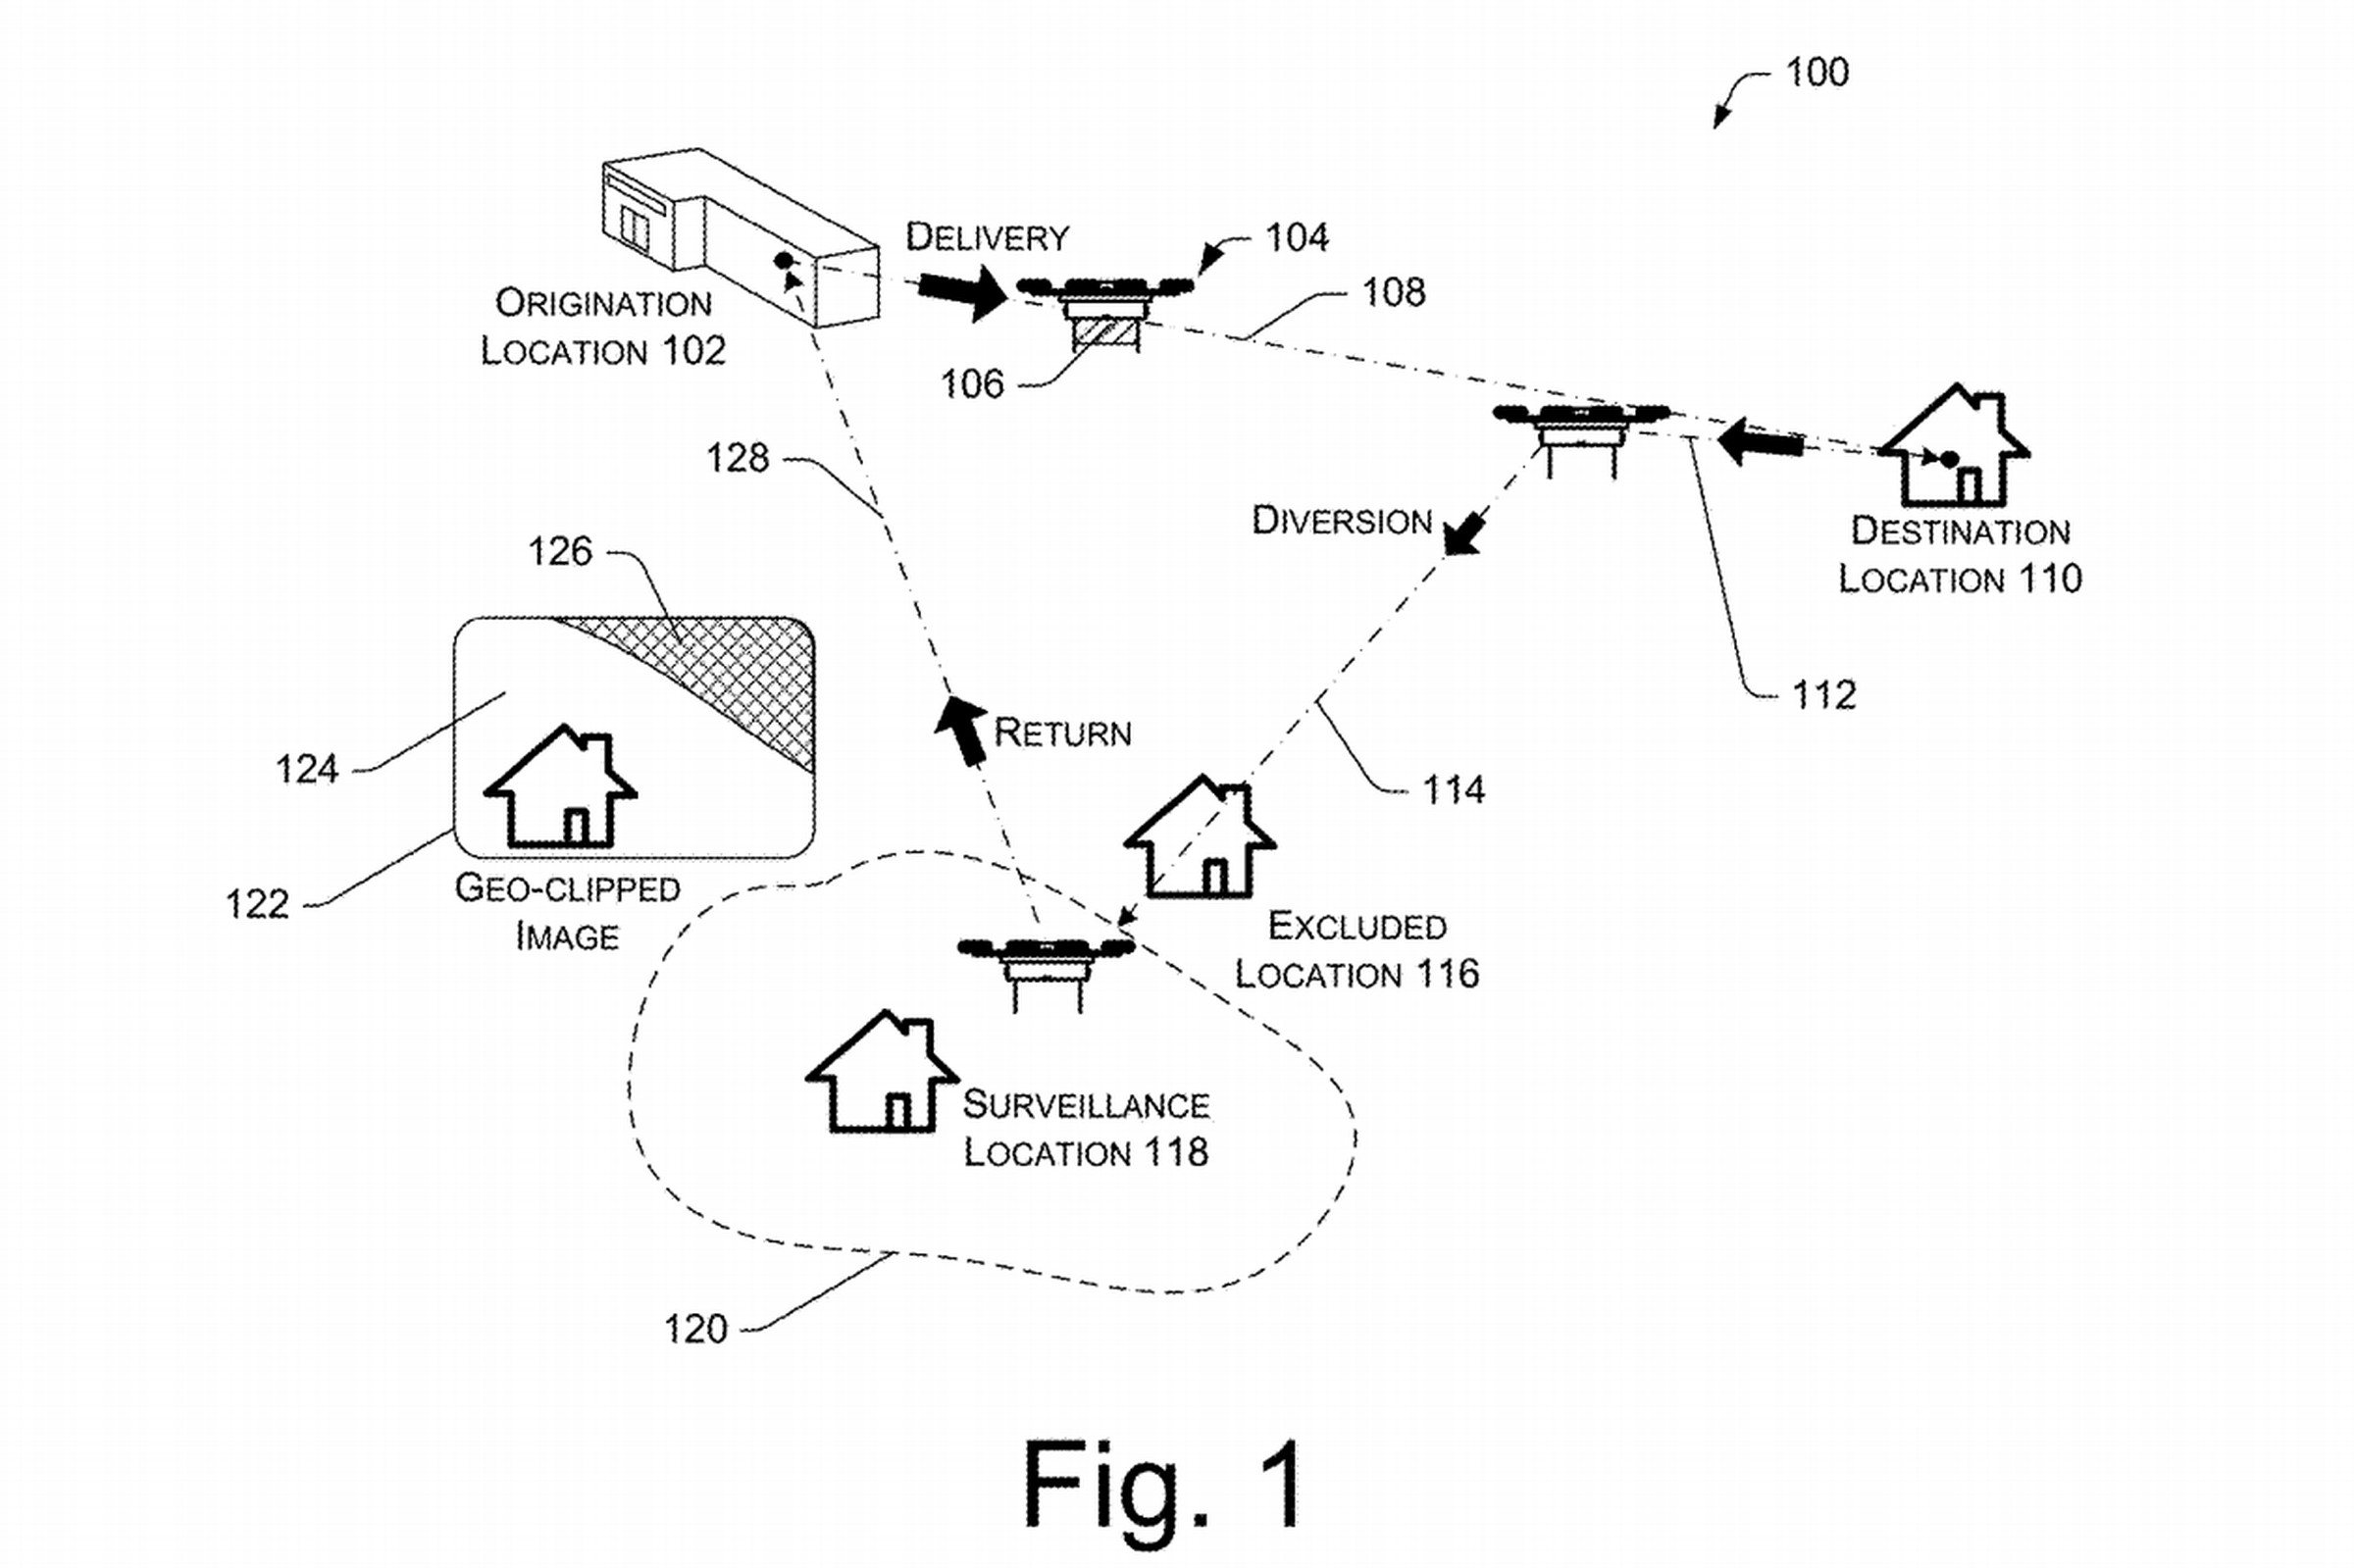 One diagram from the patent shows how delivery drones could be diverted to survey a location.